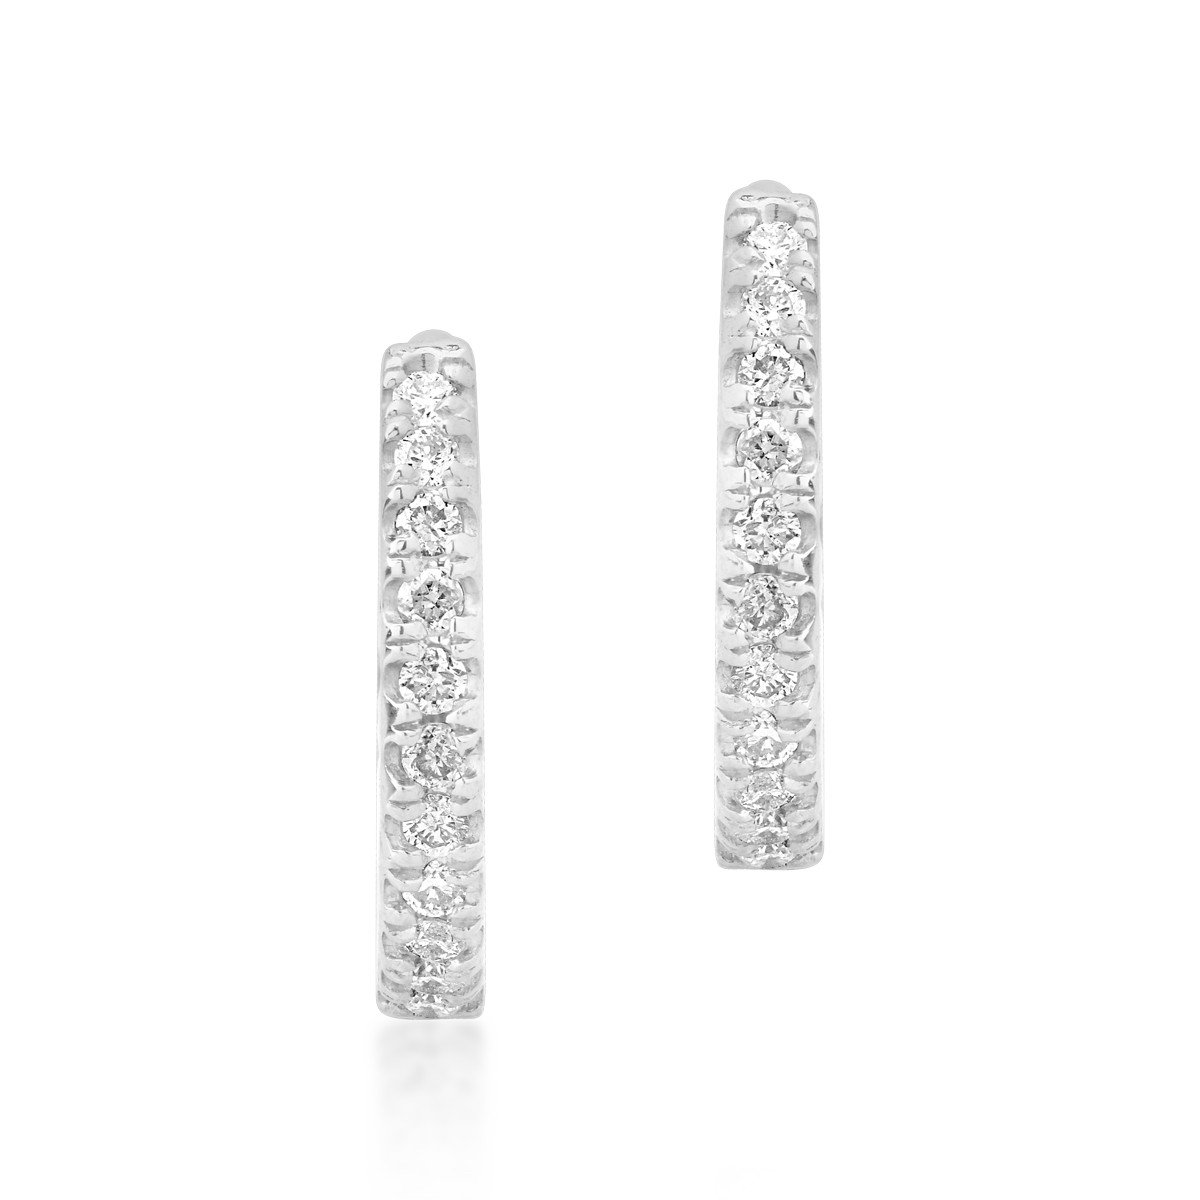 White gold earrings with 0.08ct diamonds